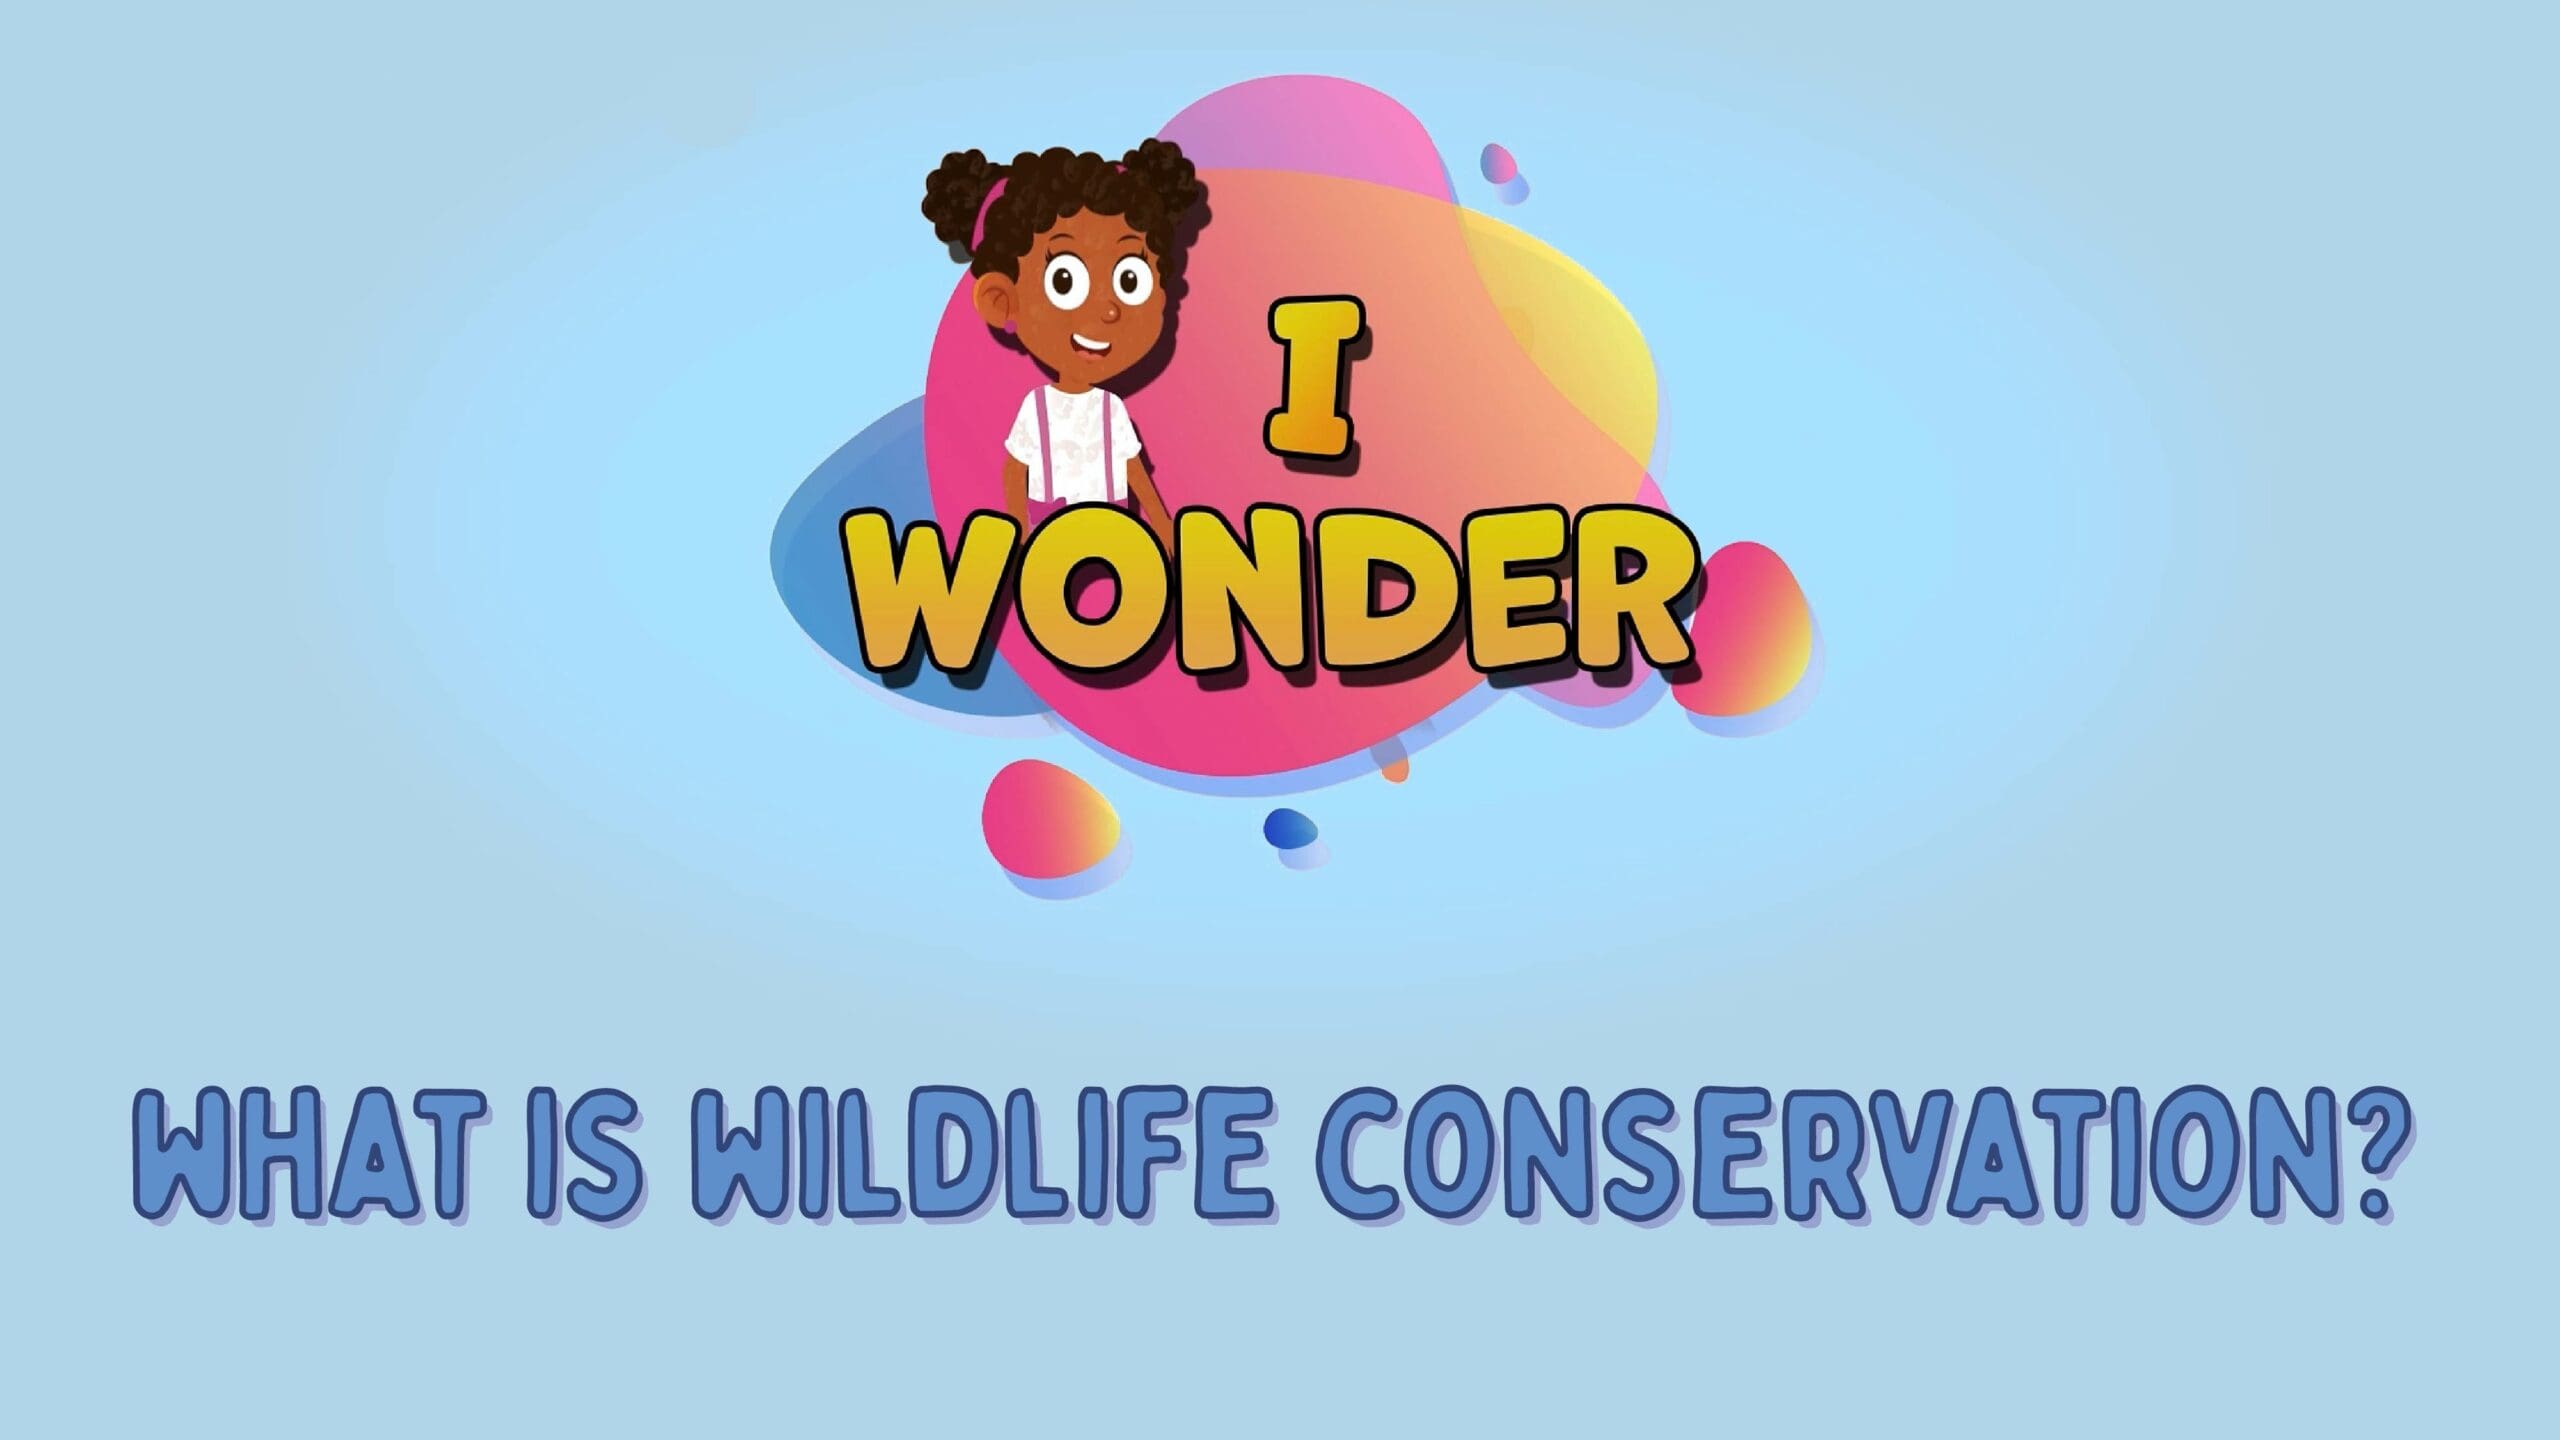 What Is Wildlife Conservation?